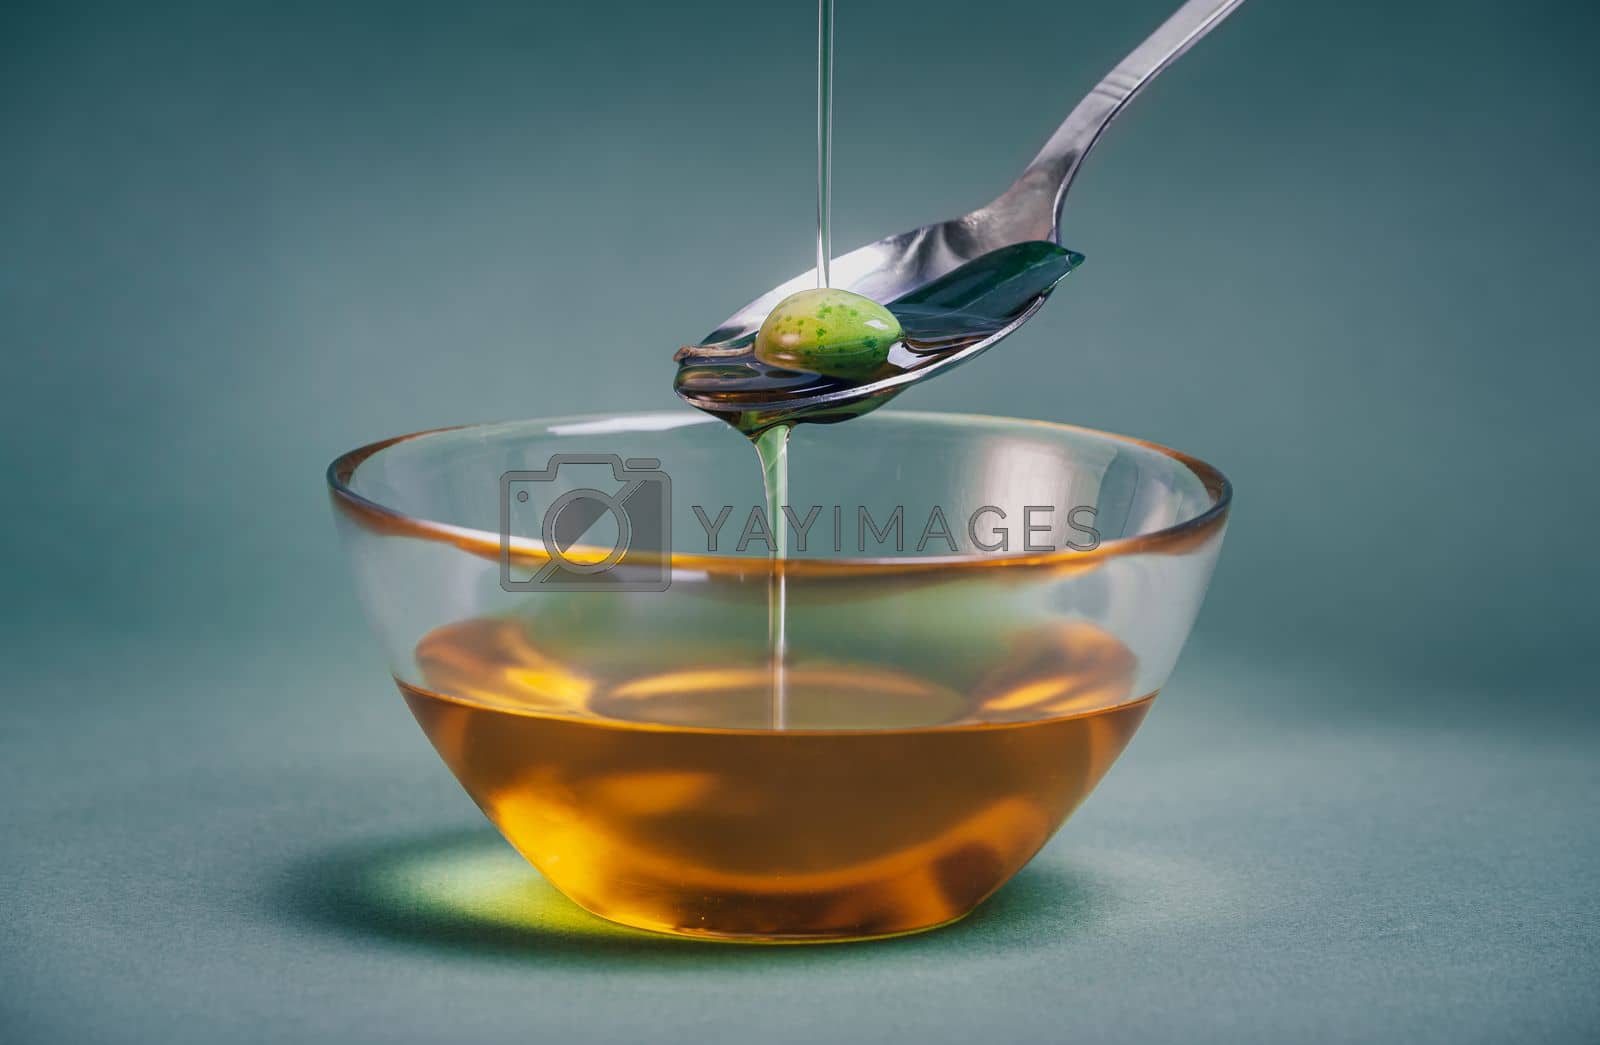 Royalty free image of Chef pouring extra virgin olive oil by Anna_Omelchenko